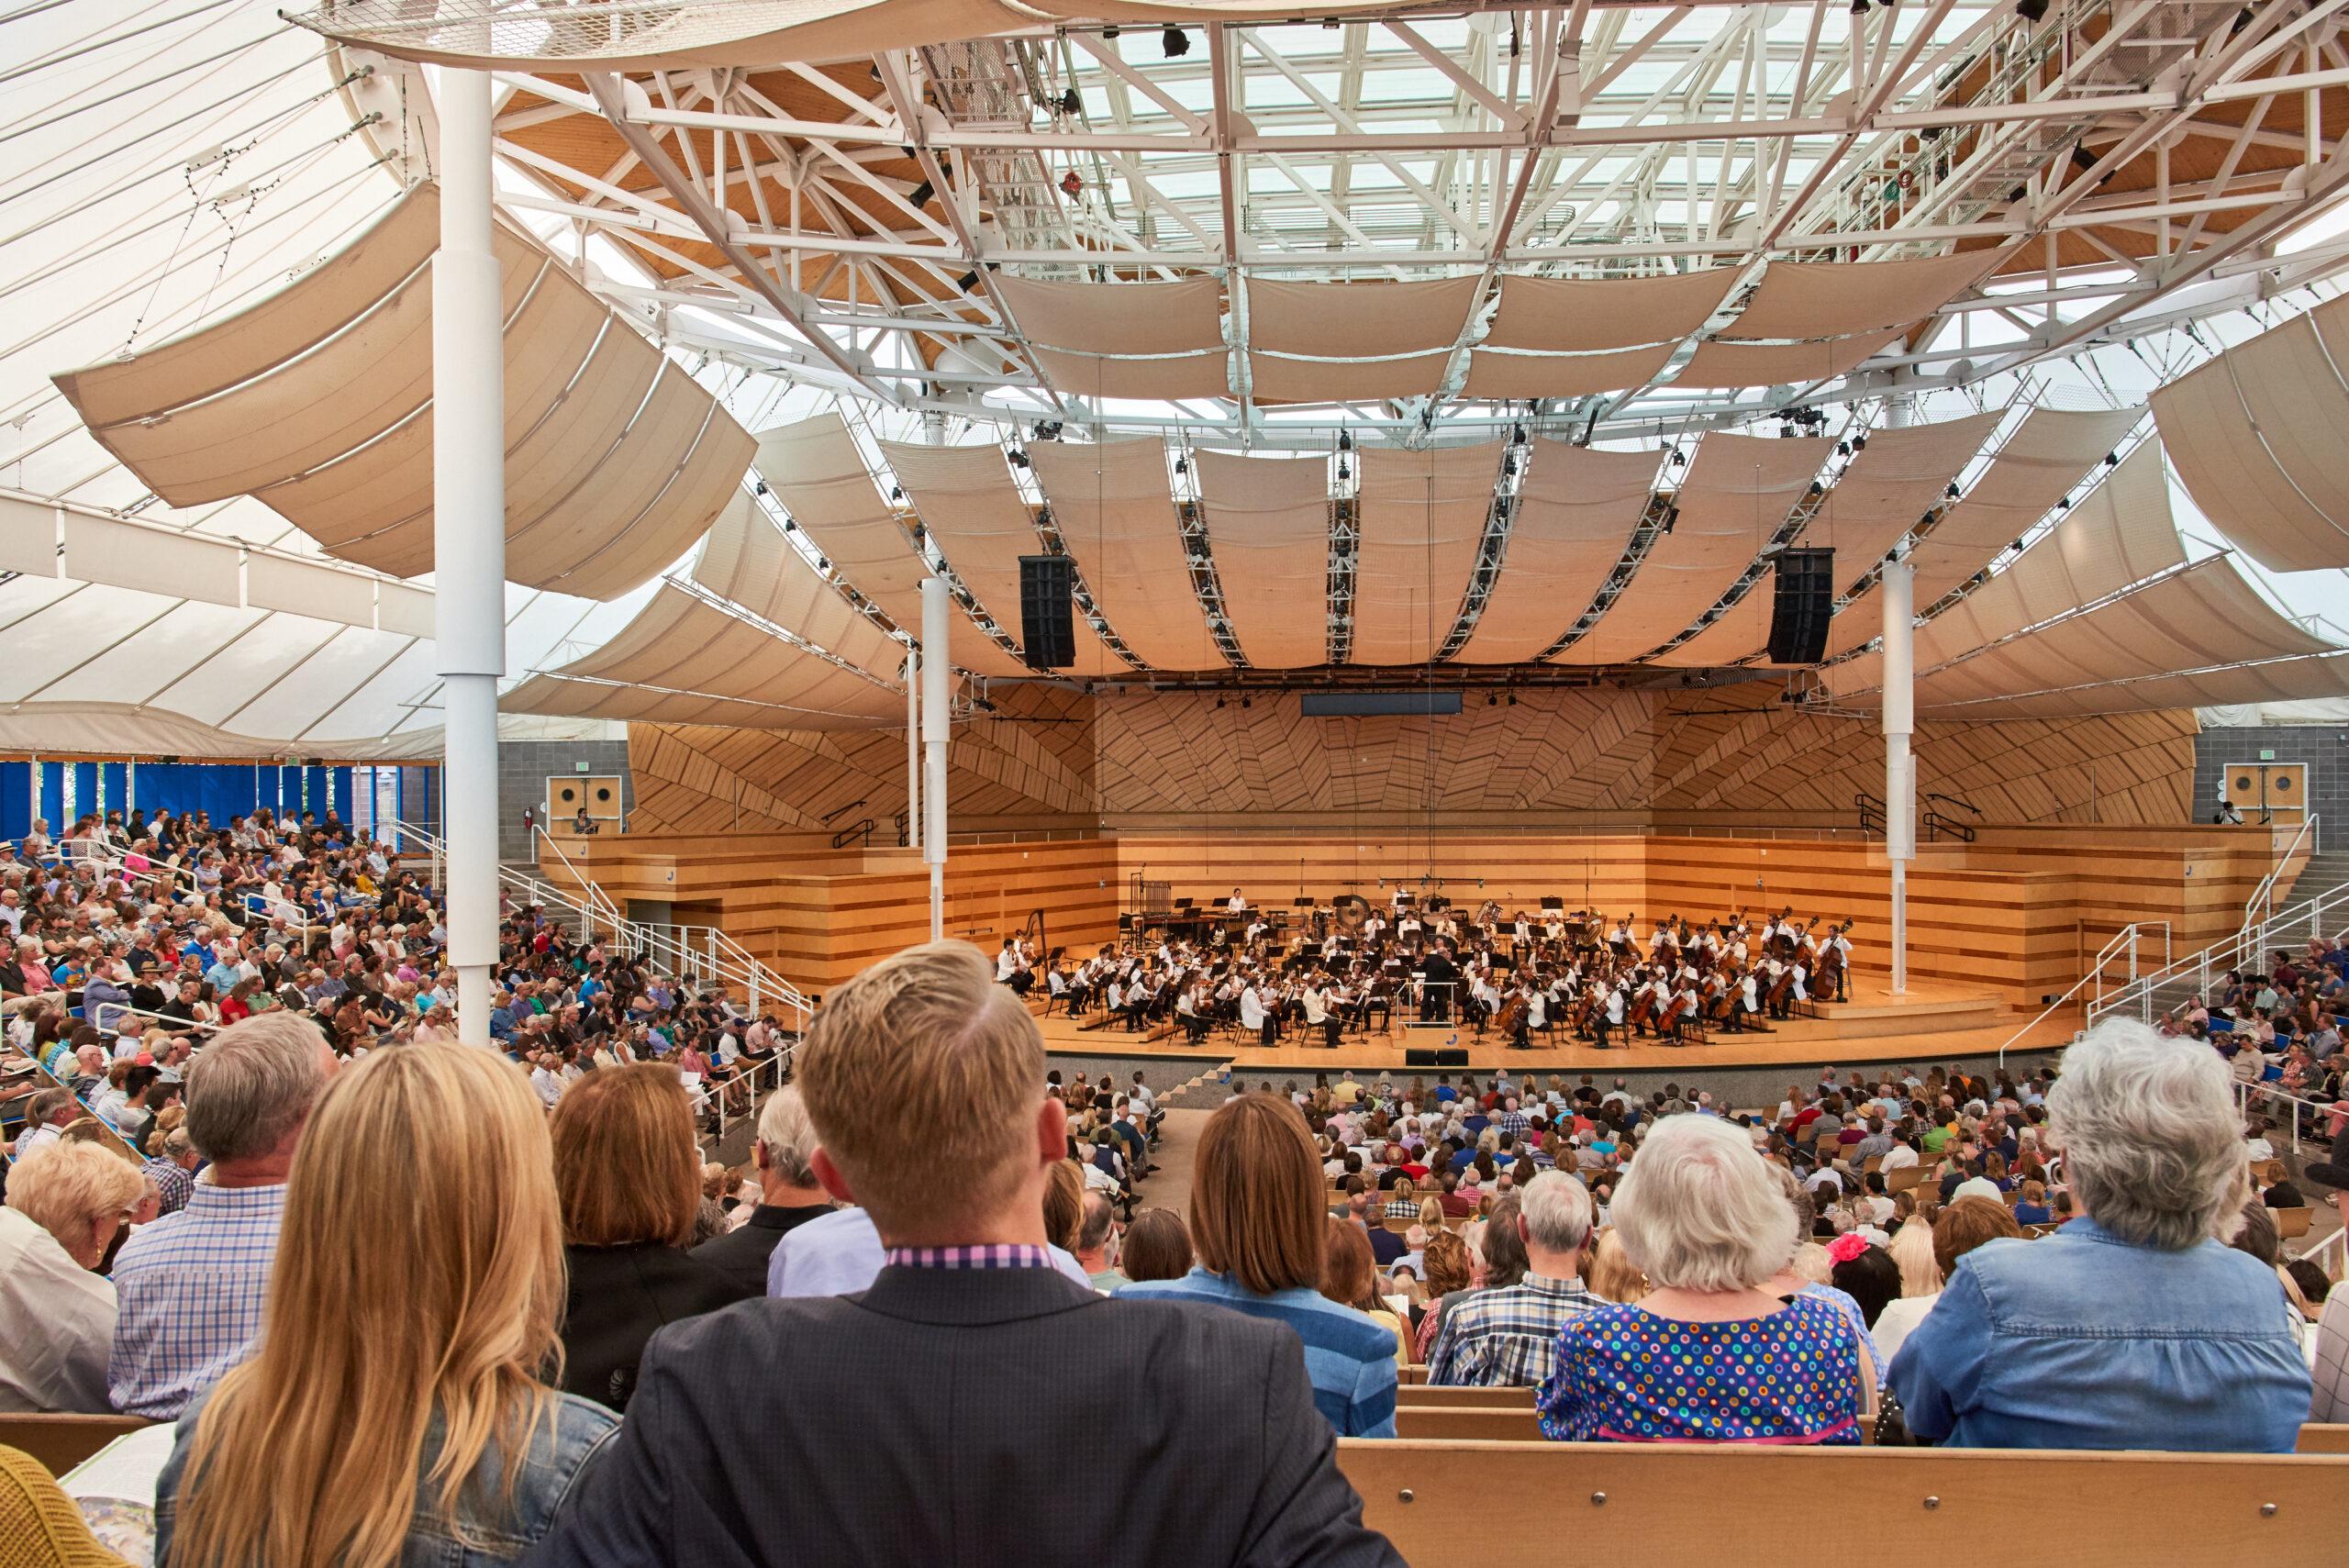 A full audience watching a performance during the Aspen Music Festival in an open-air amphitheater.